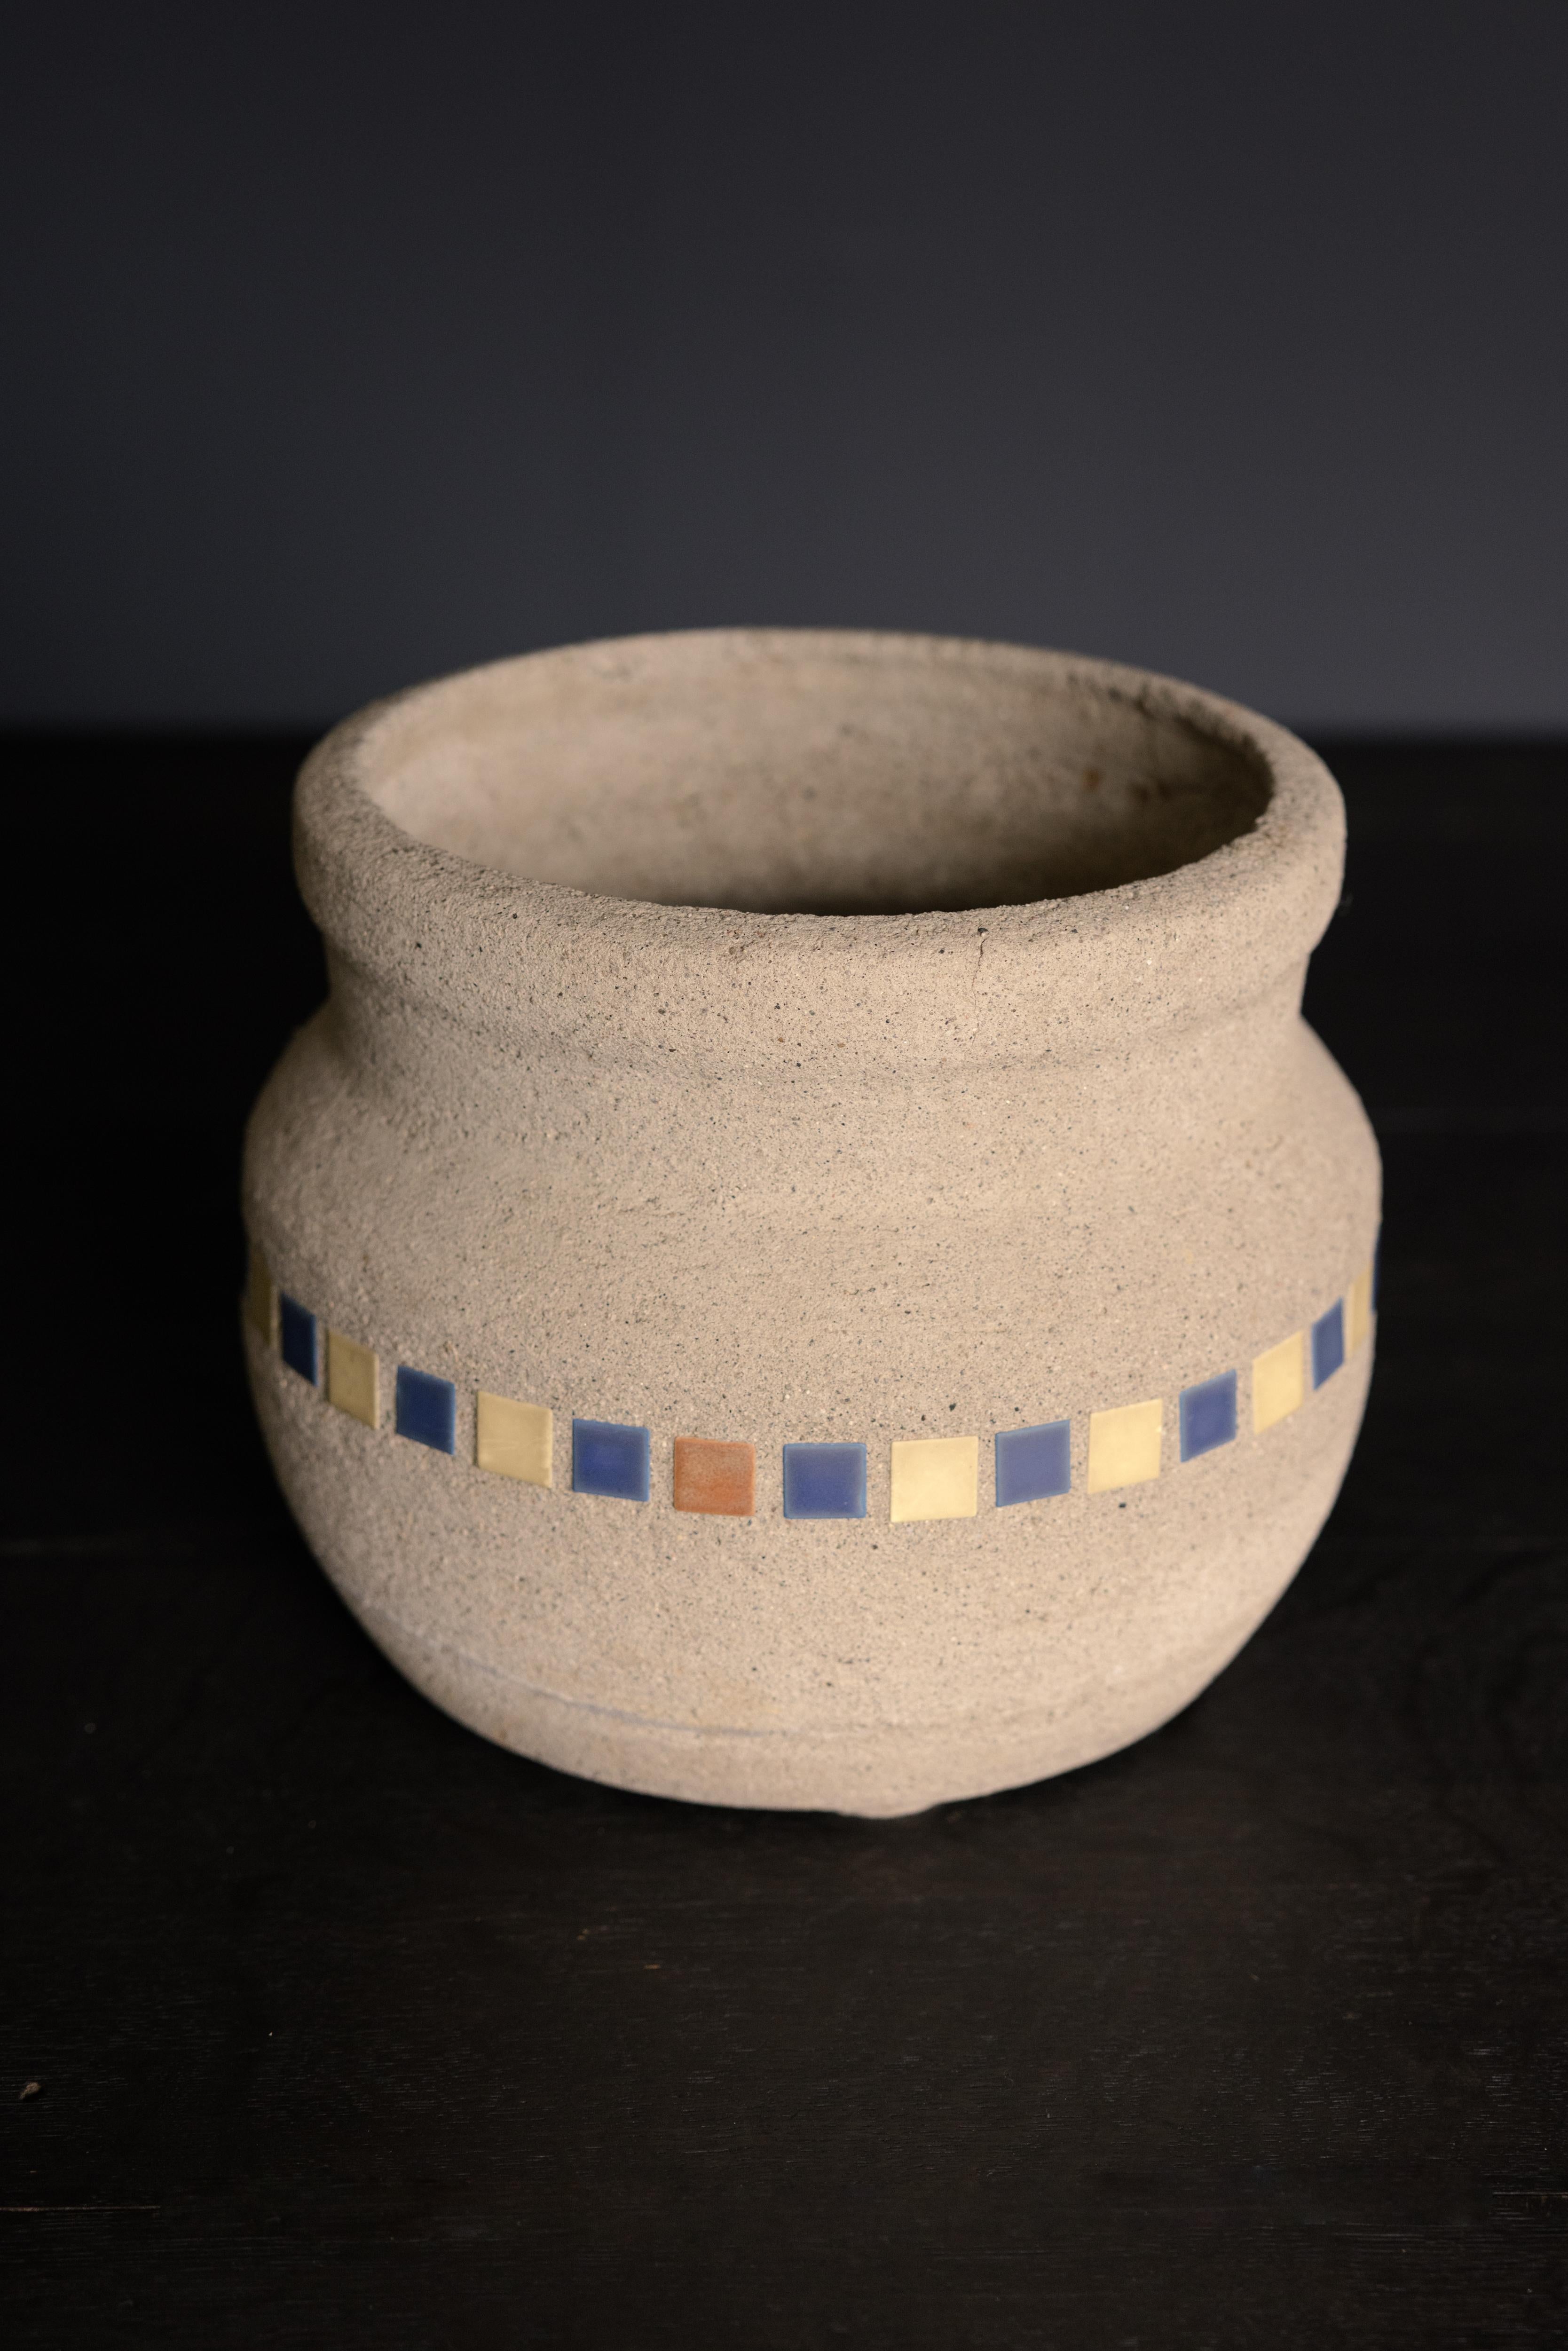 Concrete and Tiled Mosaic Planter by Hillside Pottery Company, c. 1920's, USA
Concrete with Tiled Mosaic Band in Cream and Blue with Tan

H 9.75